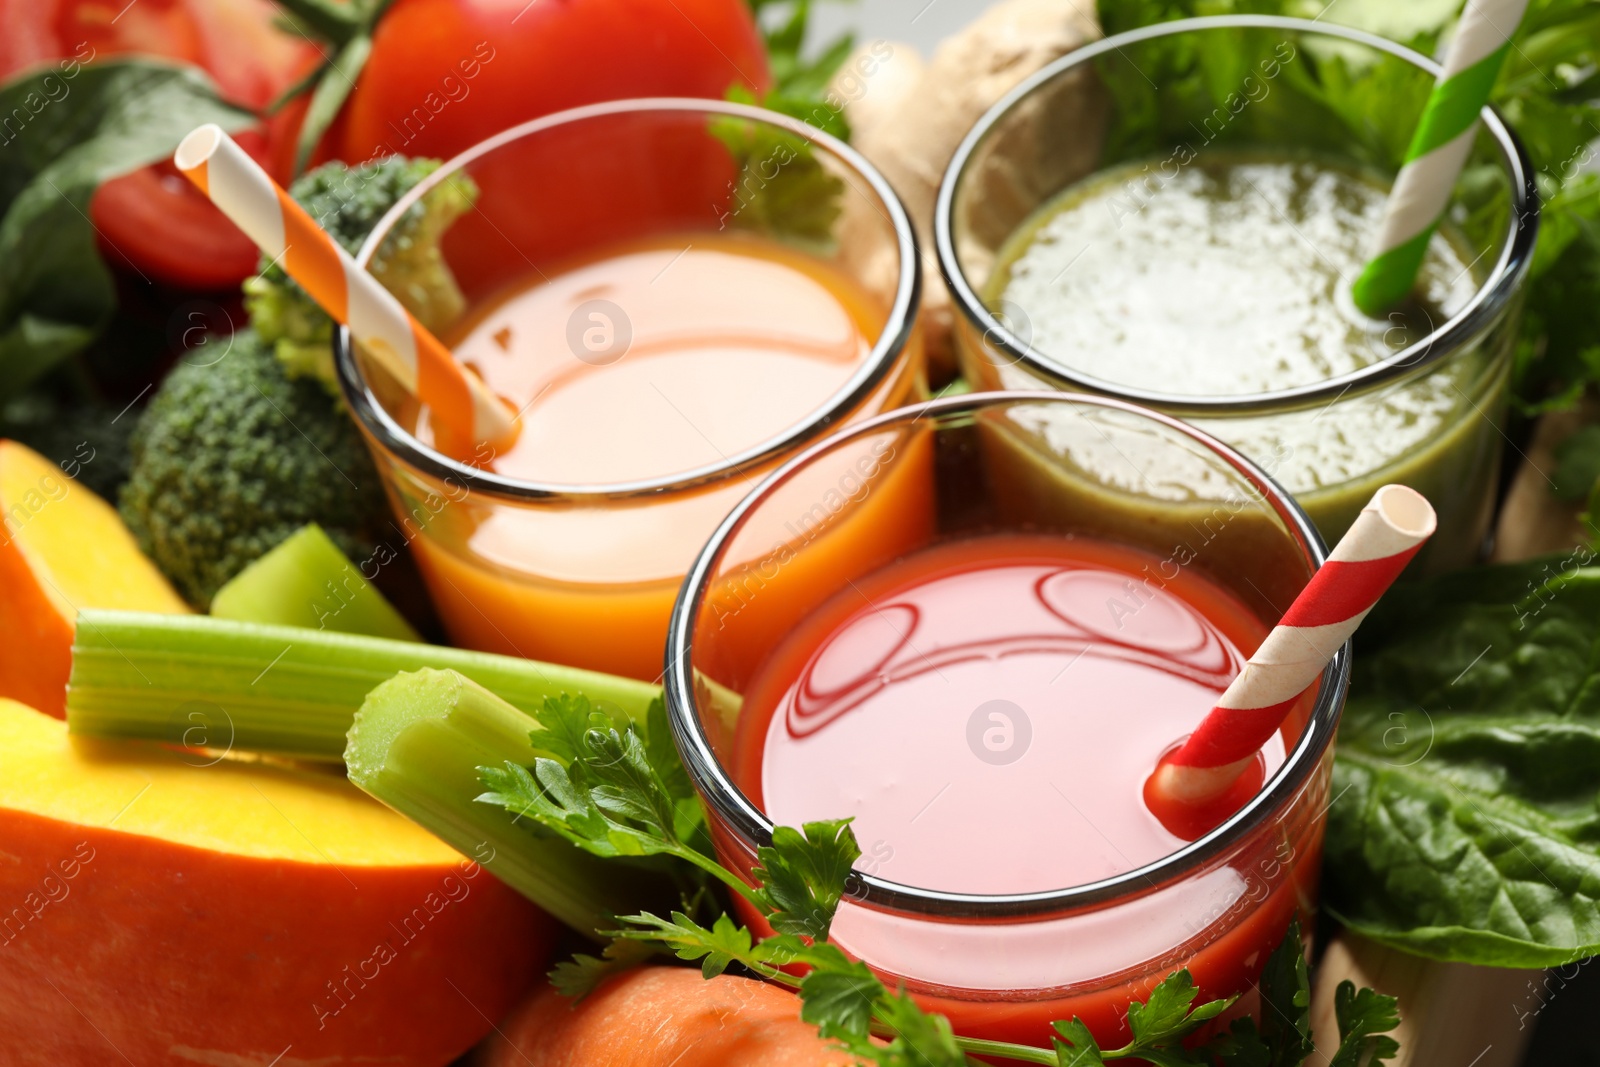 Photo of Delicious vegetable juices and fresh ingredients, closeup view